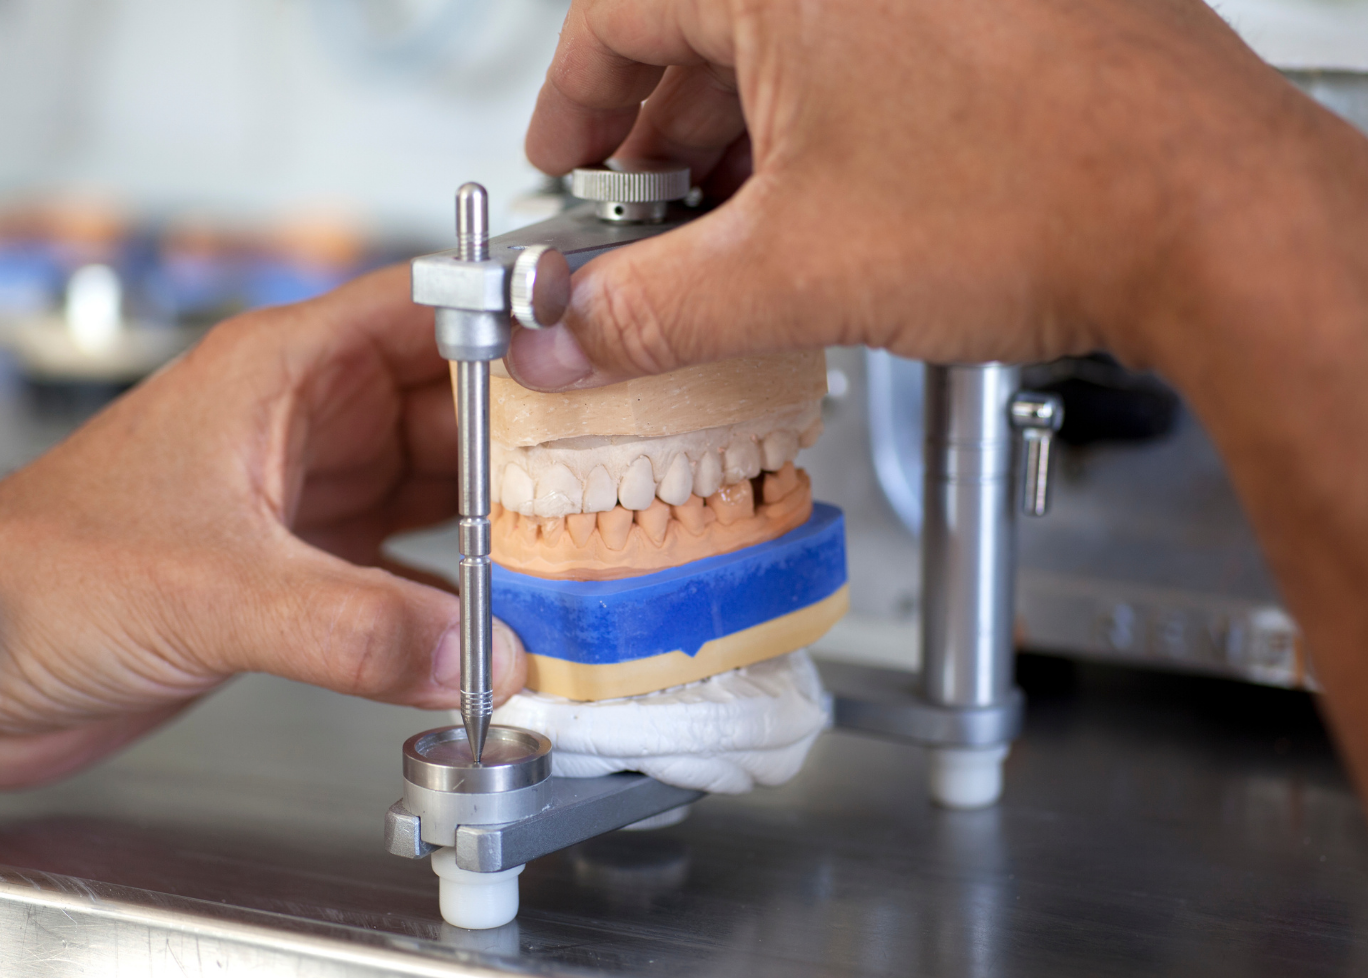 How to set up a Dental Laboratory Part 2: Traditional Models with a Digital In-House Laboratory